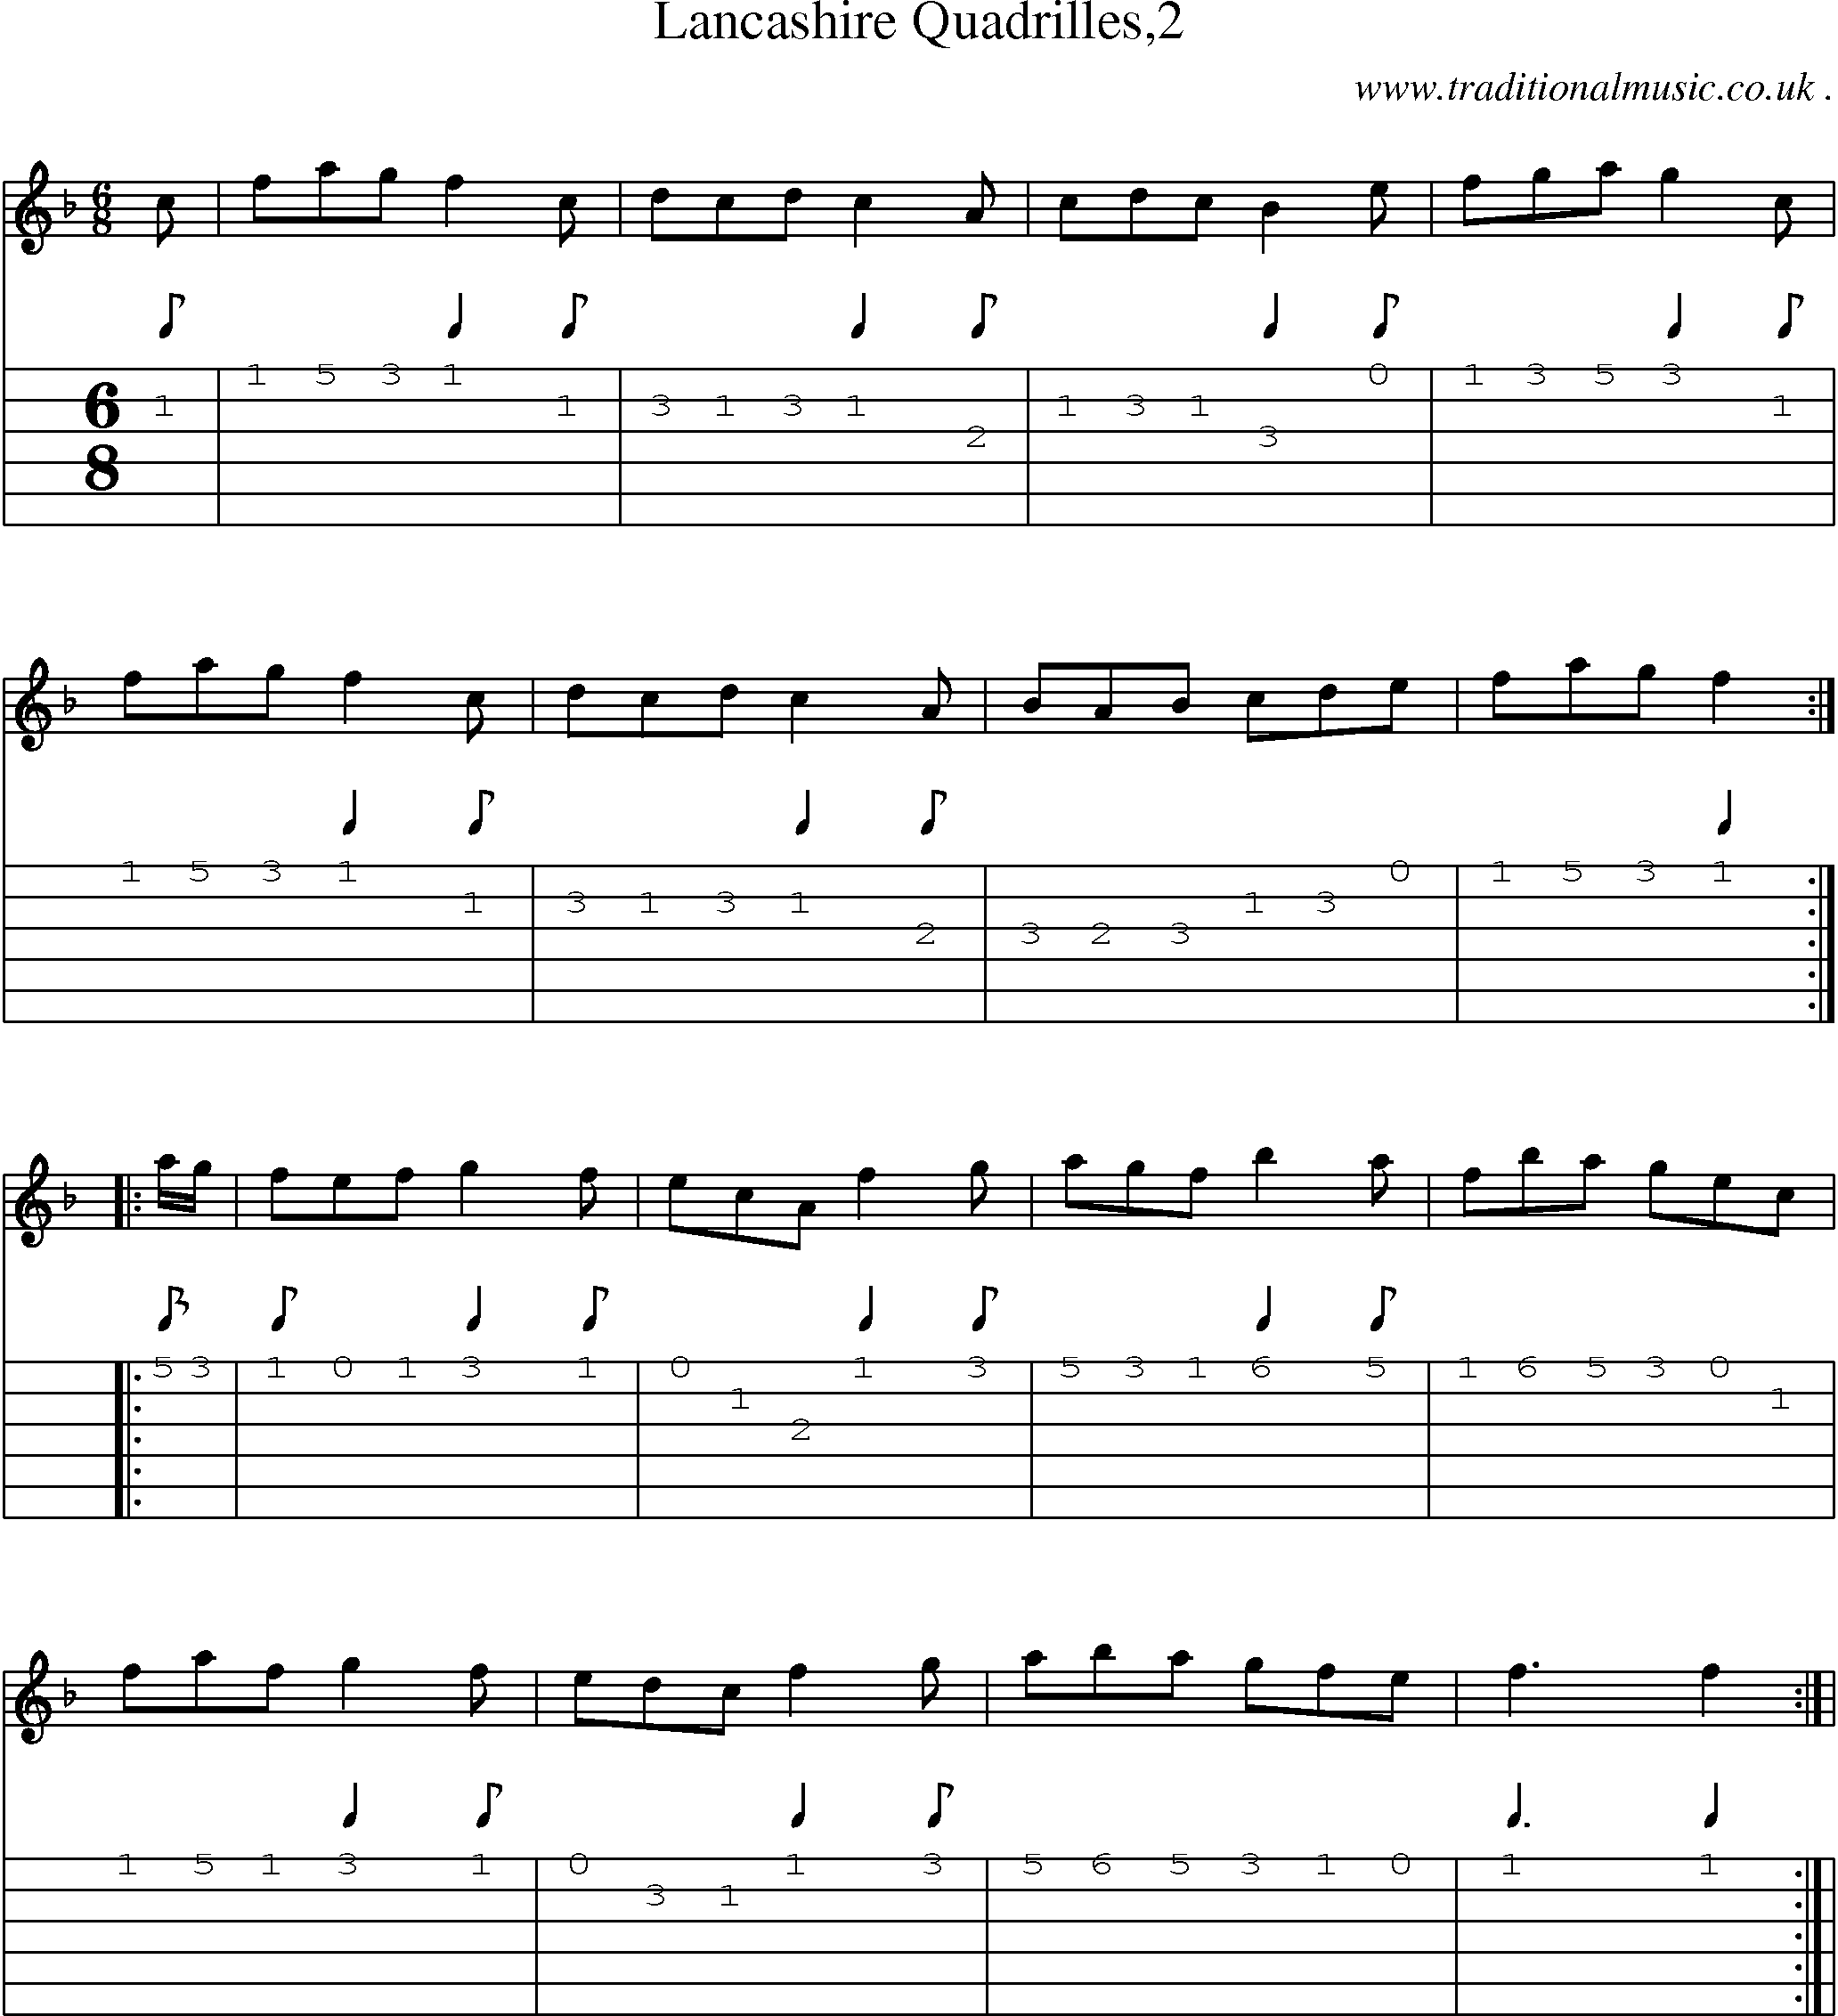 Sheet-Music and Guitar Tabs for Lancashire Quadrilles2